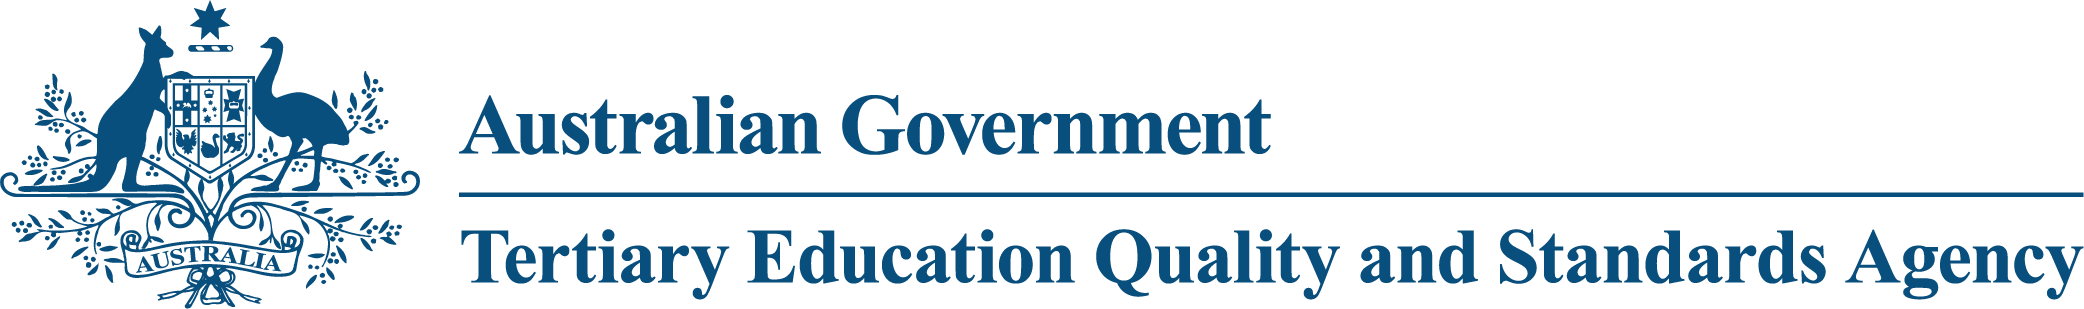 Australian Government: Tertiary Education Quality and Standards Agency